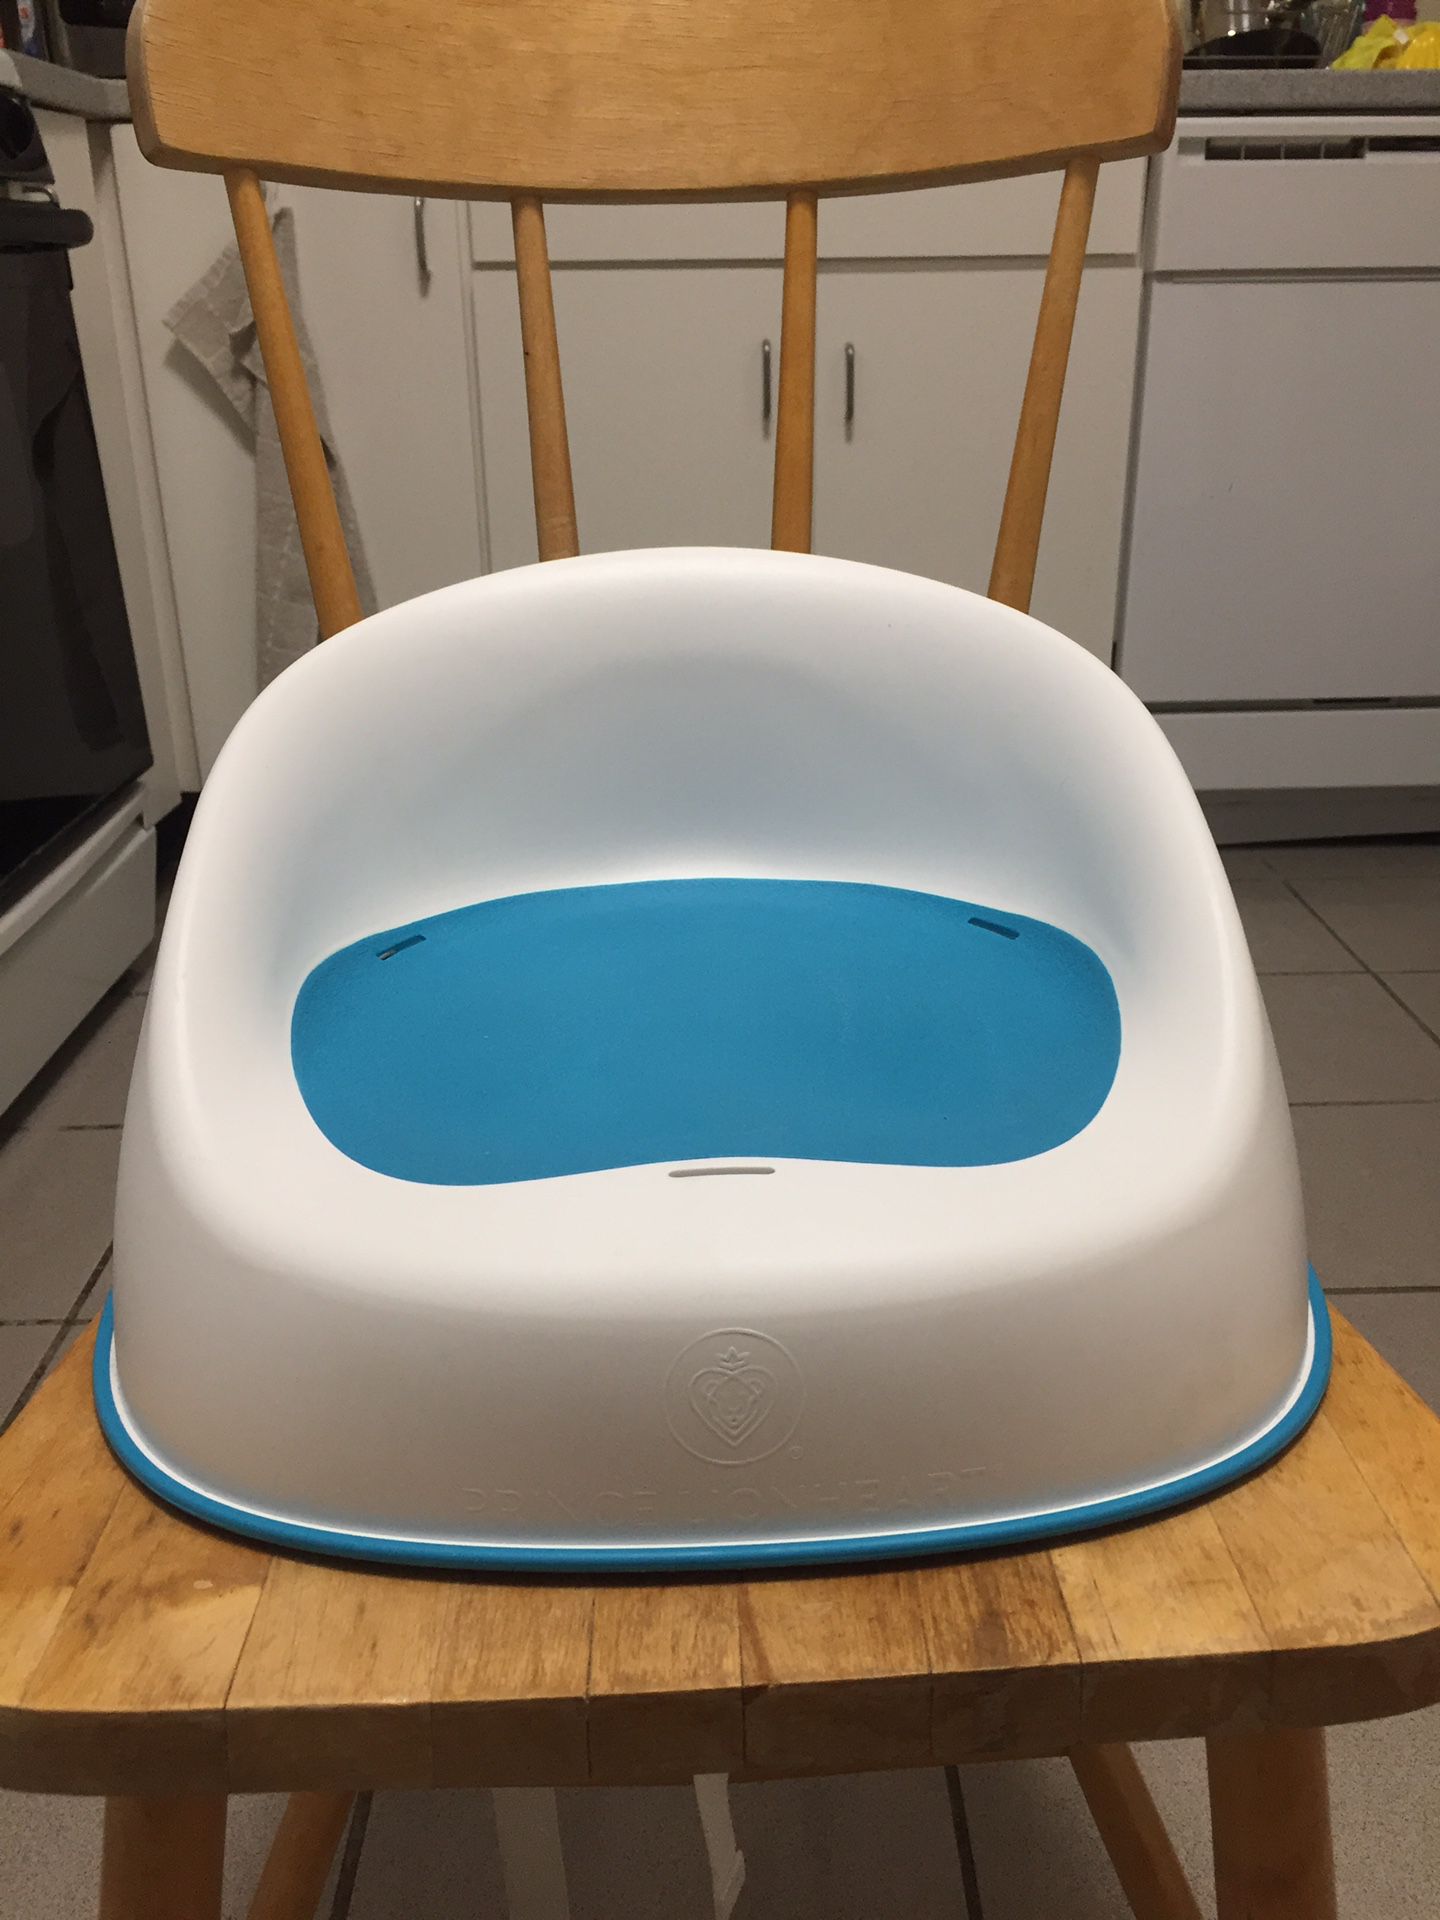 Dining booster seat - drop off available (depending on location)